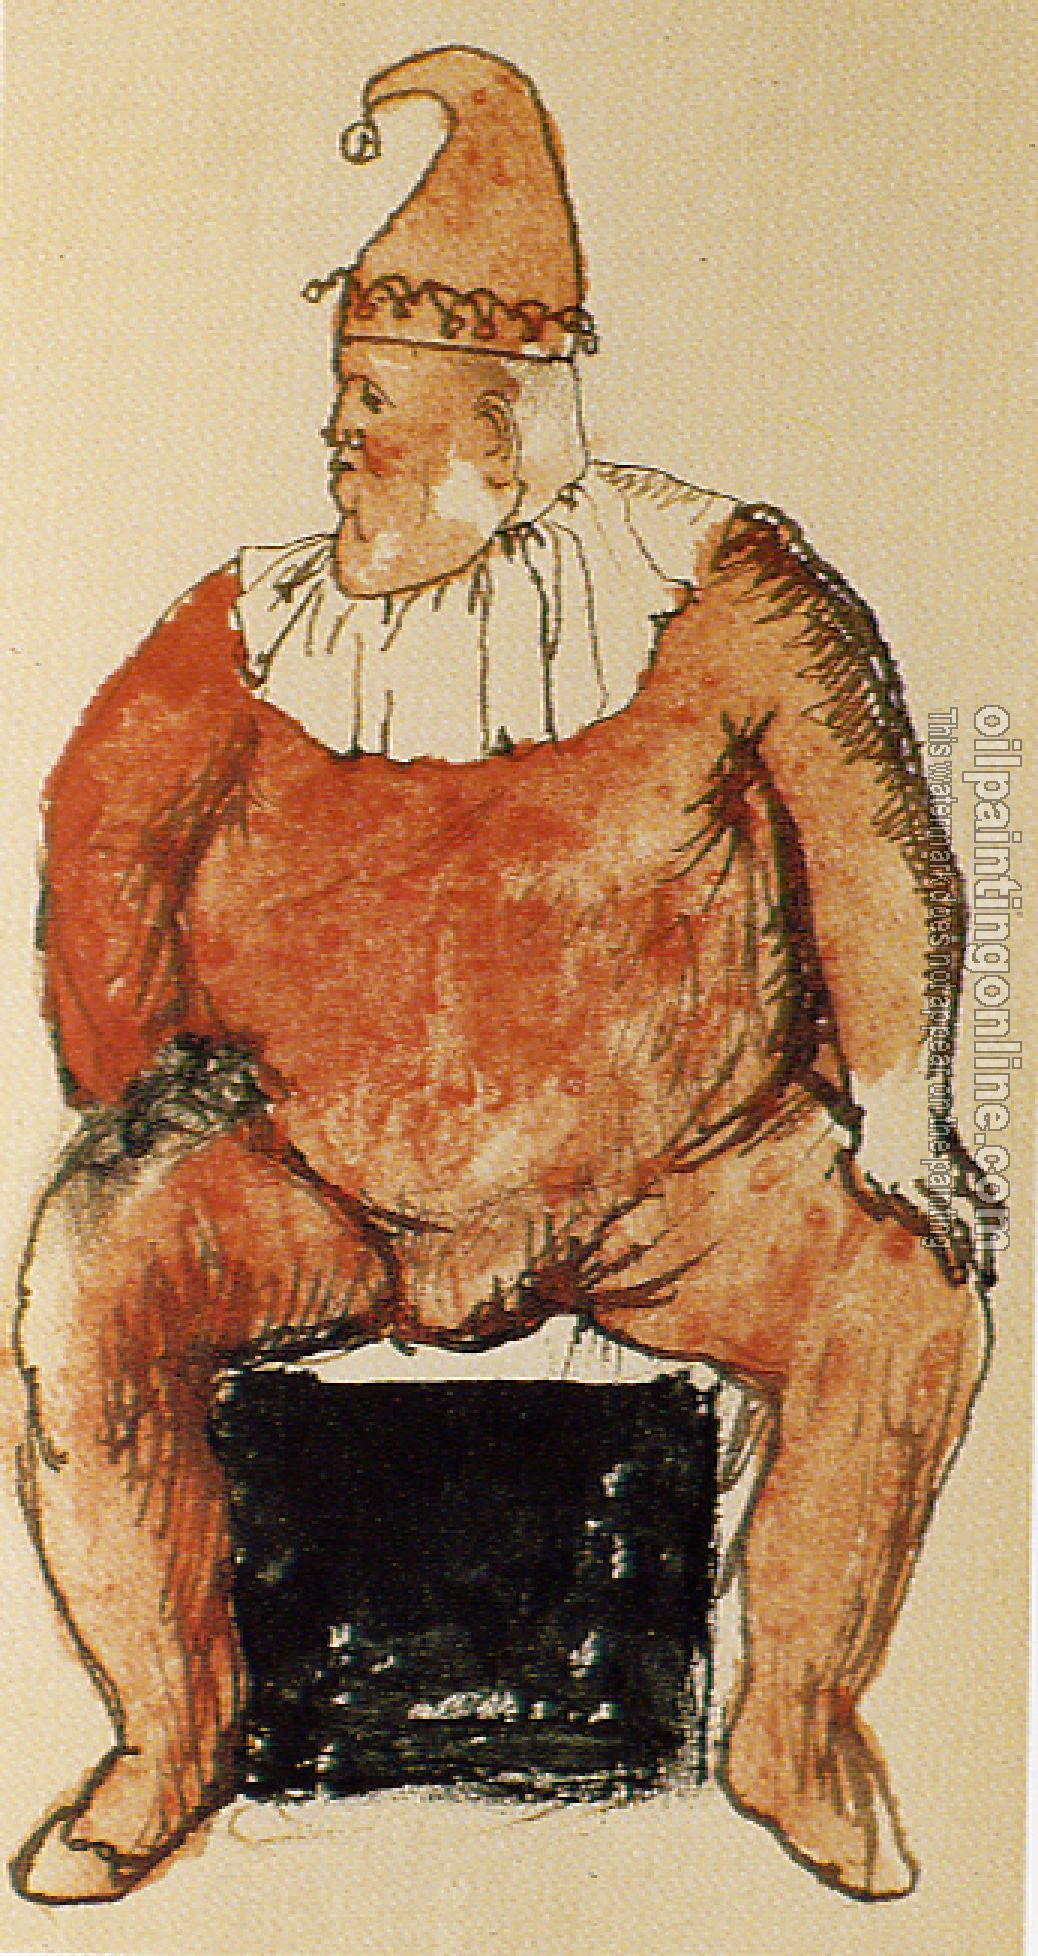 Picasso, Pablo - Fat Clown Seated